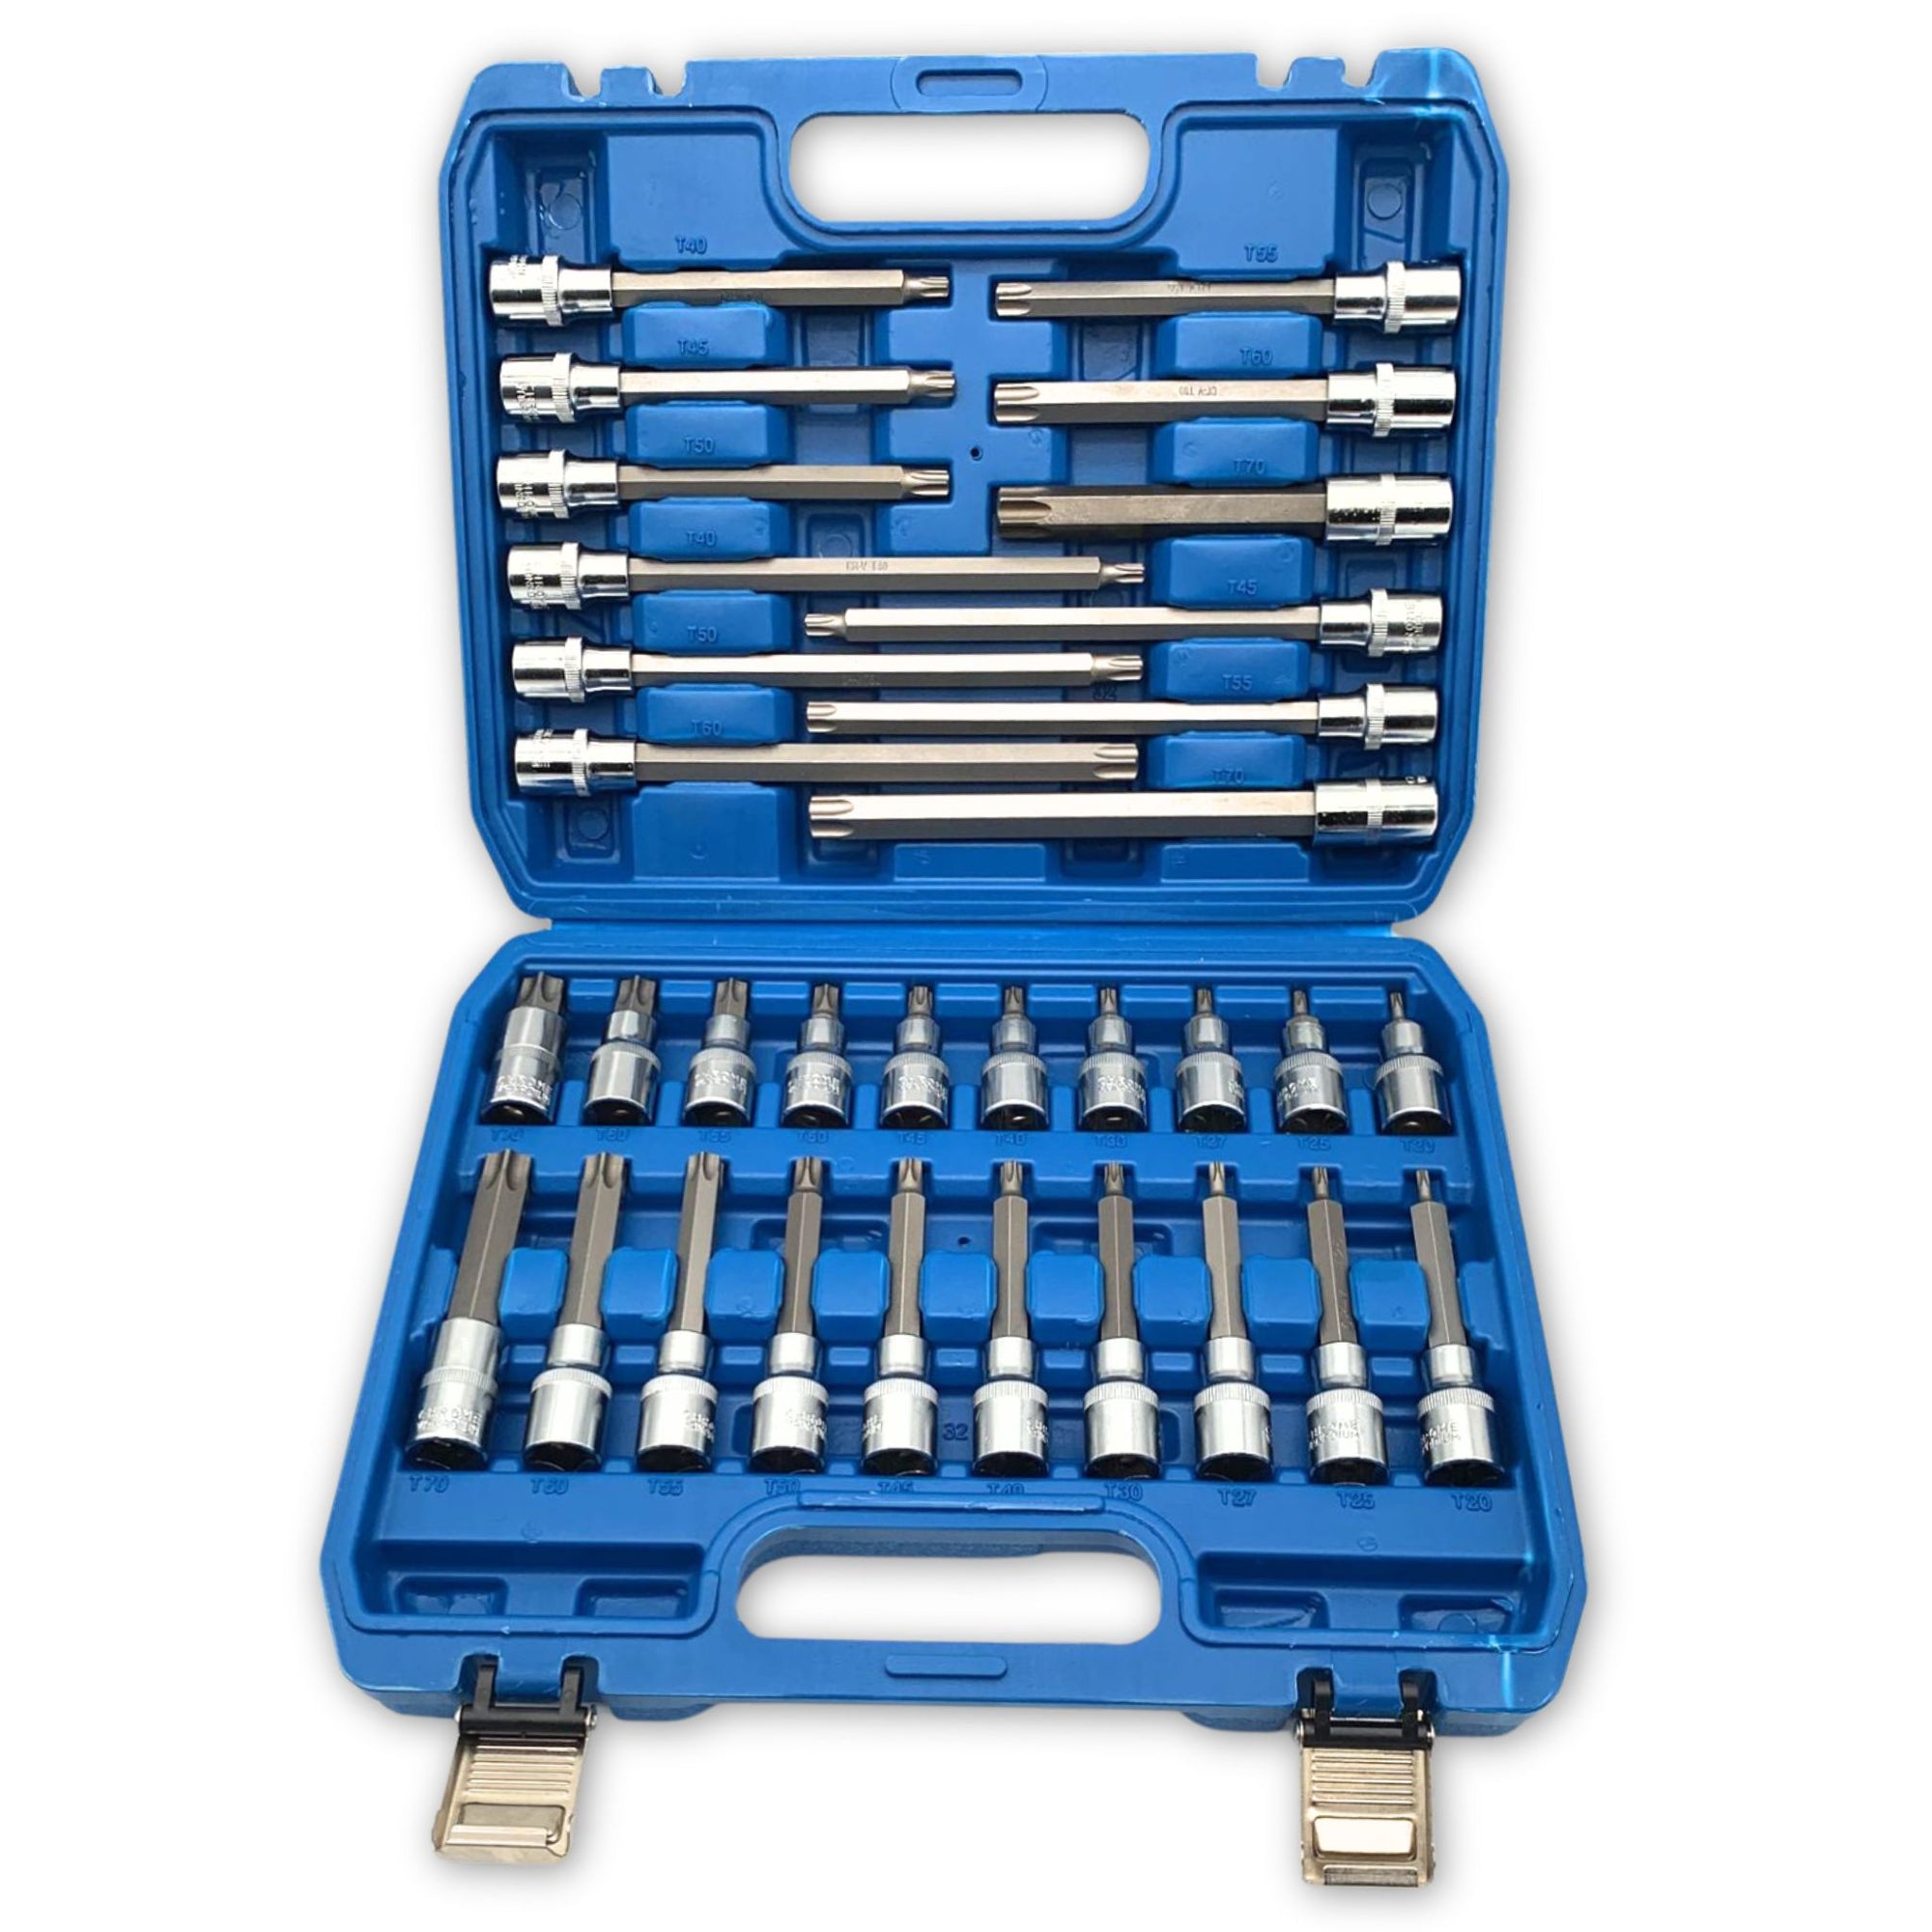 32 Piece Torx Socket and Nut Set, 1/2" Drive - South East Clearance Centre